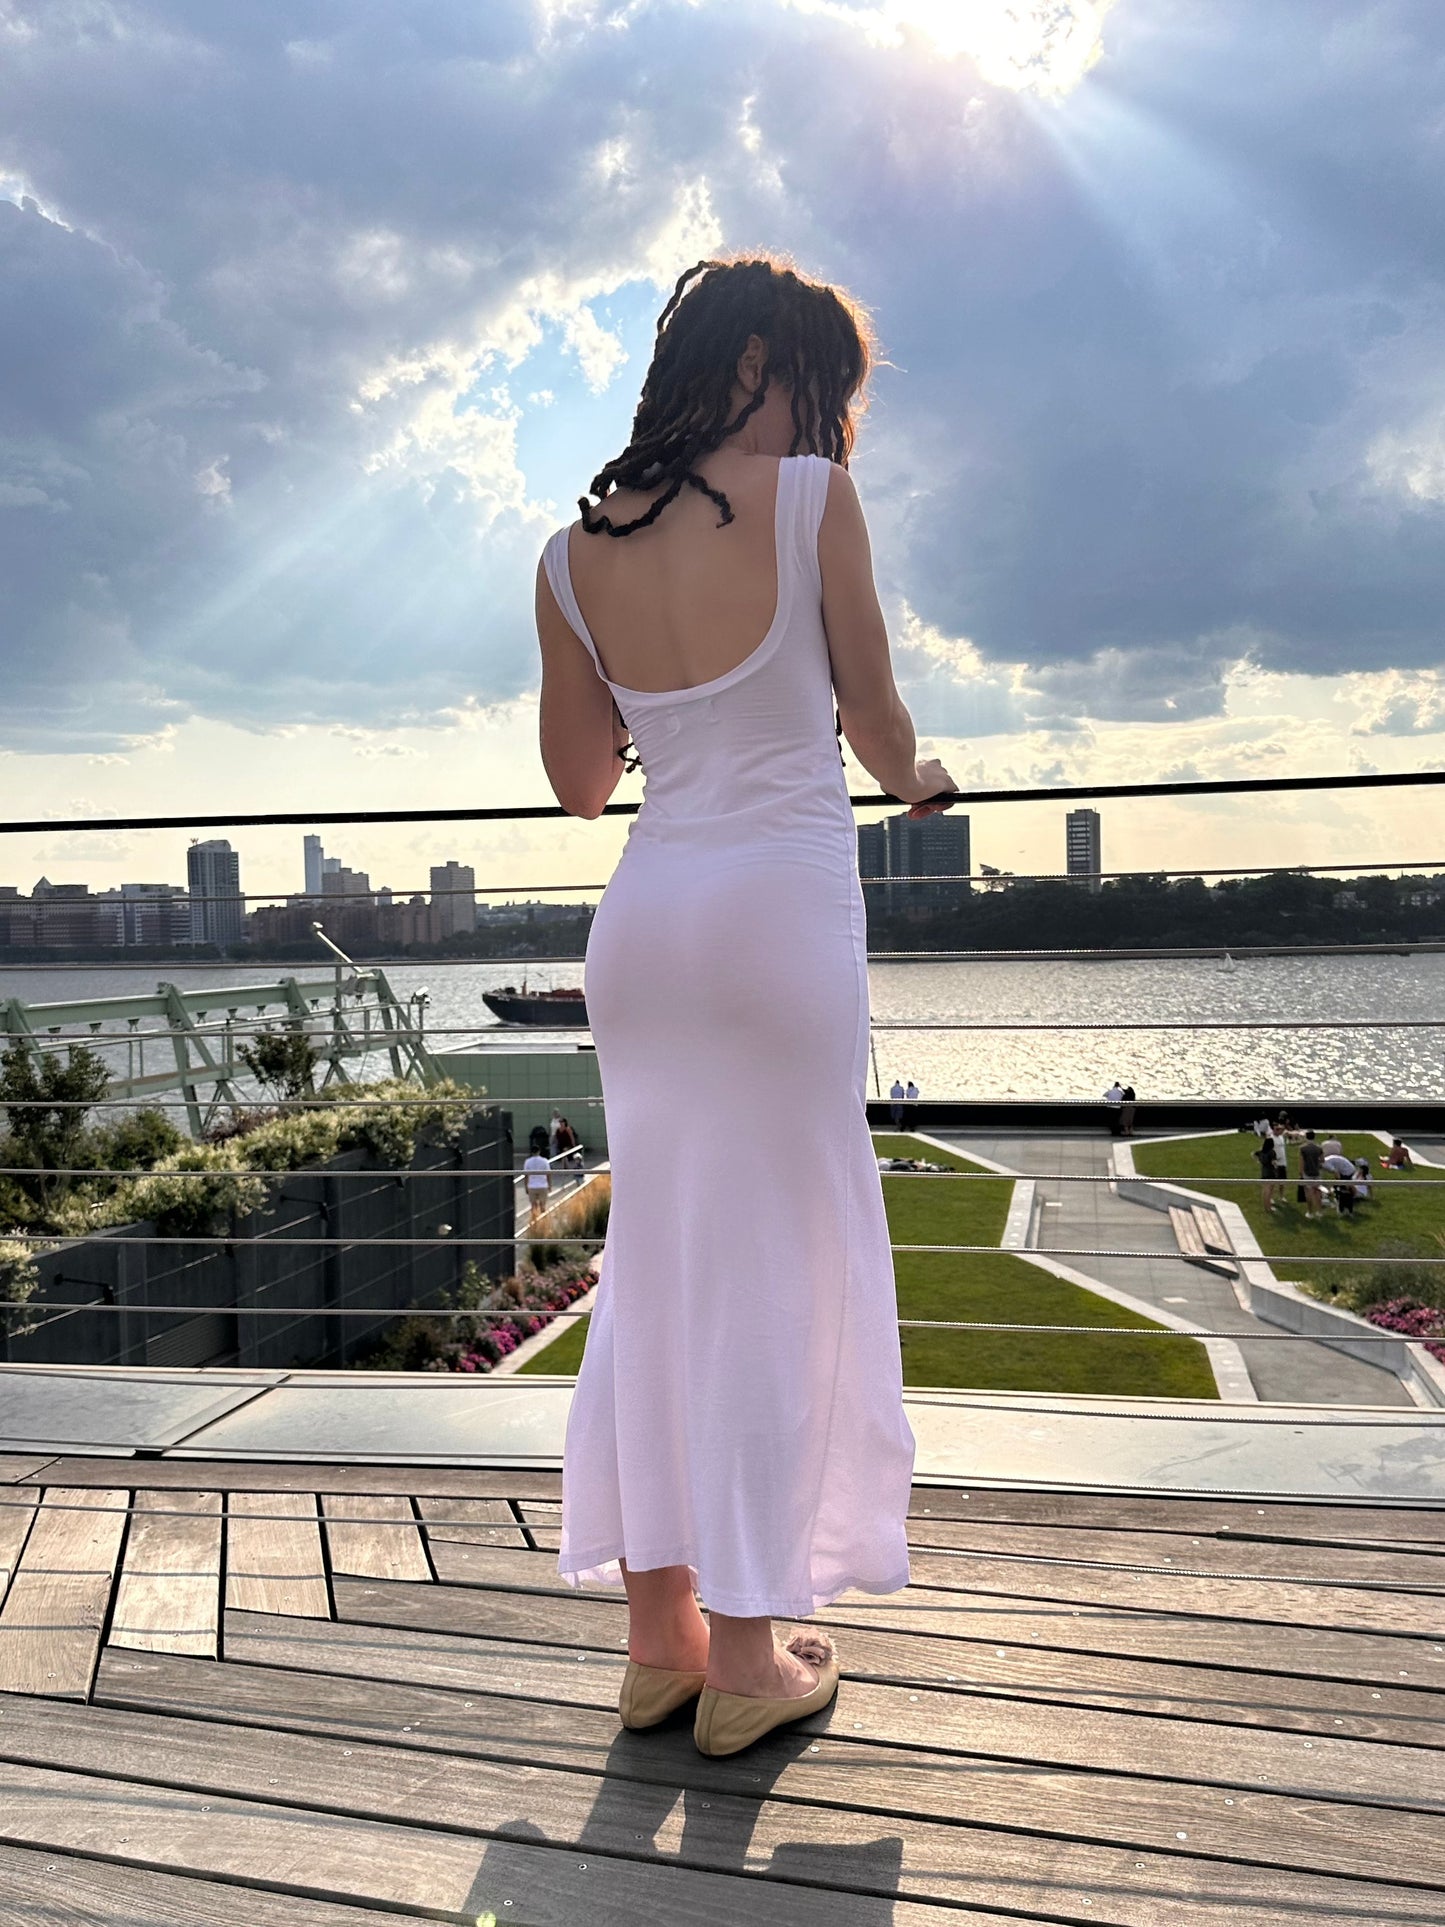 Flora Backless Maxi Dress in White